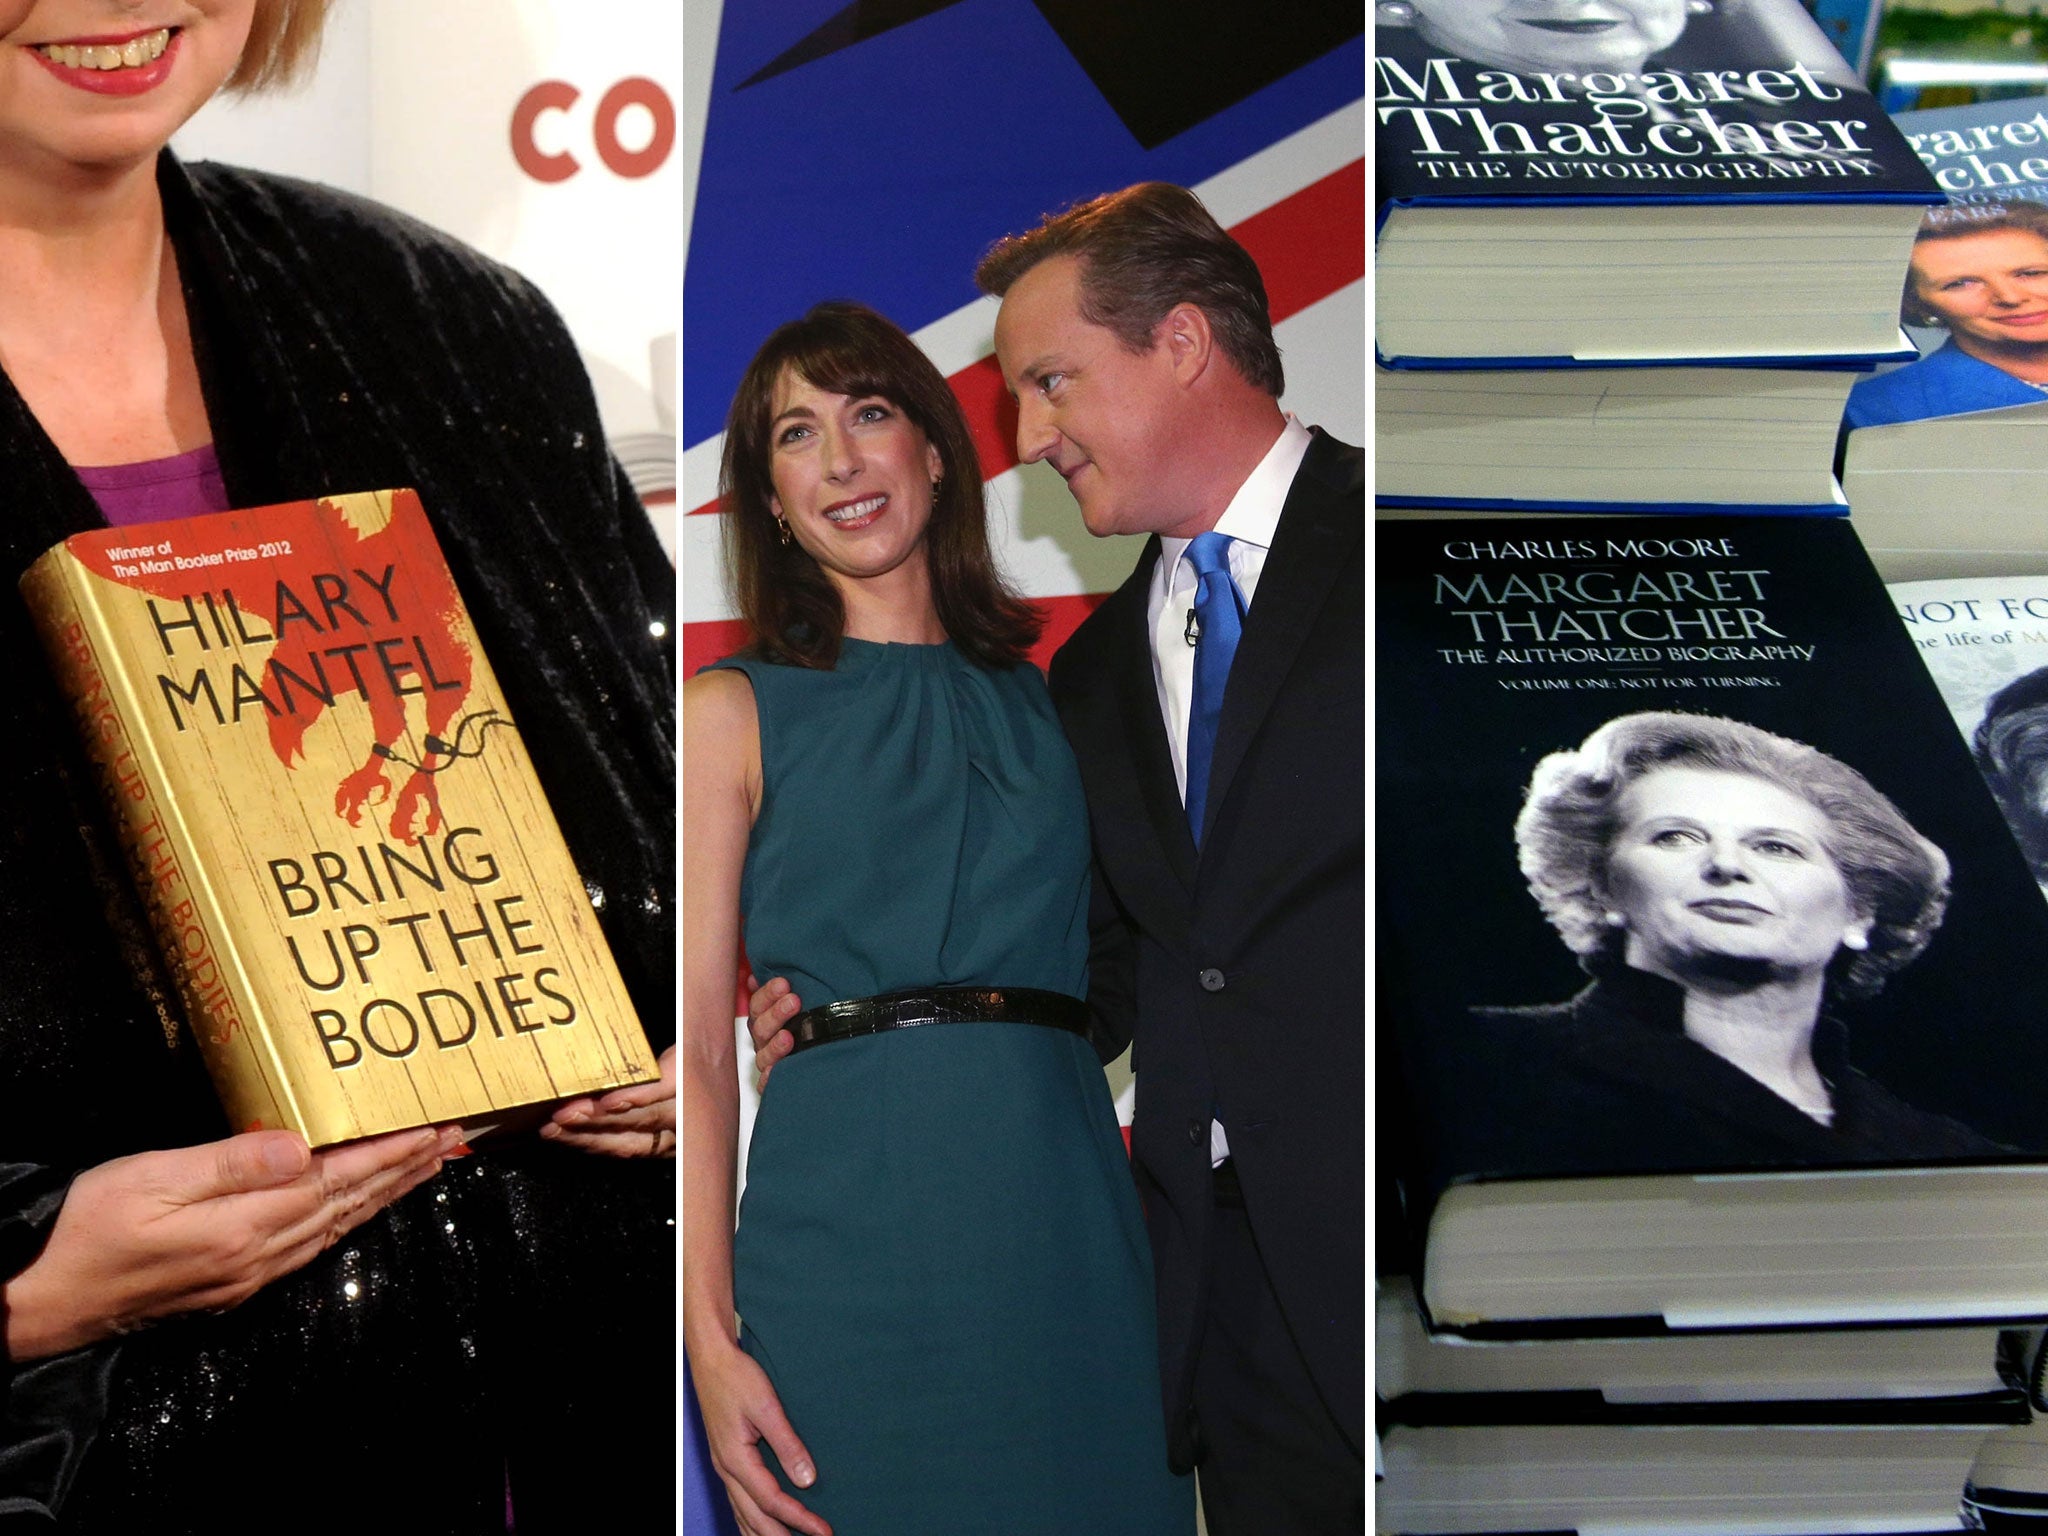 David Cameron came baring gifts: Hilary Mantel's Booker winning novels, a framed black and white photograph of him and Samanth and Charles Moore's biography of Thatcher